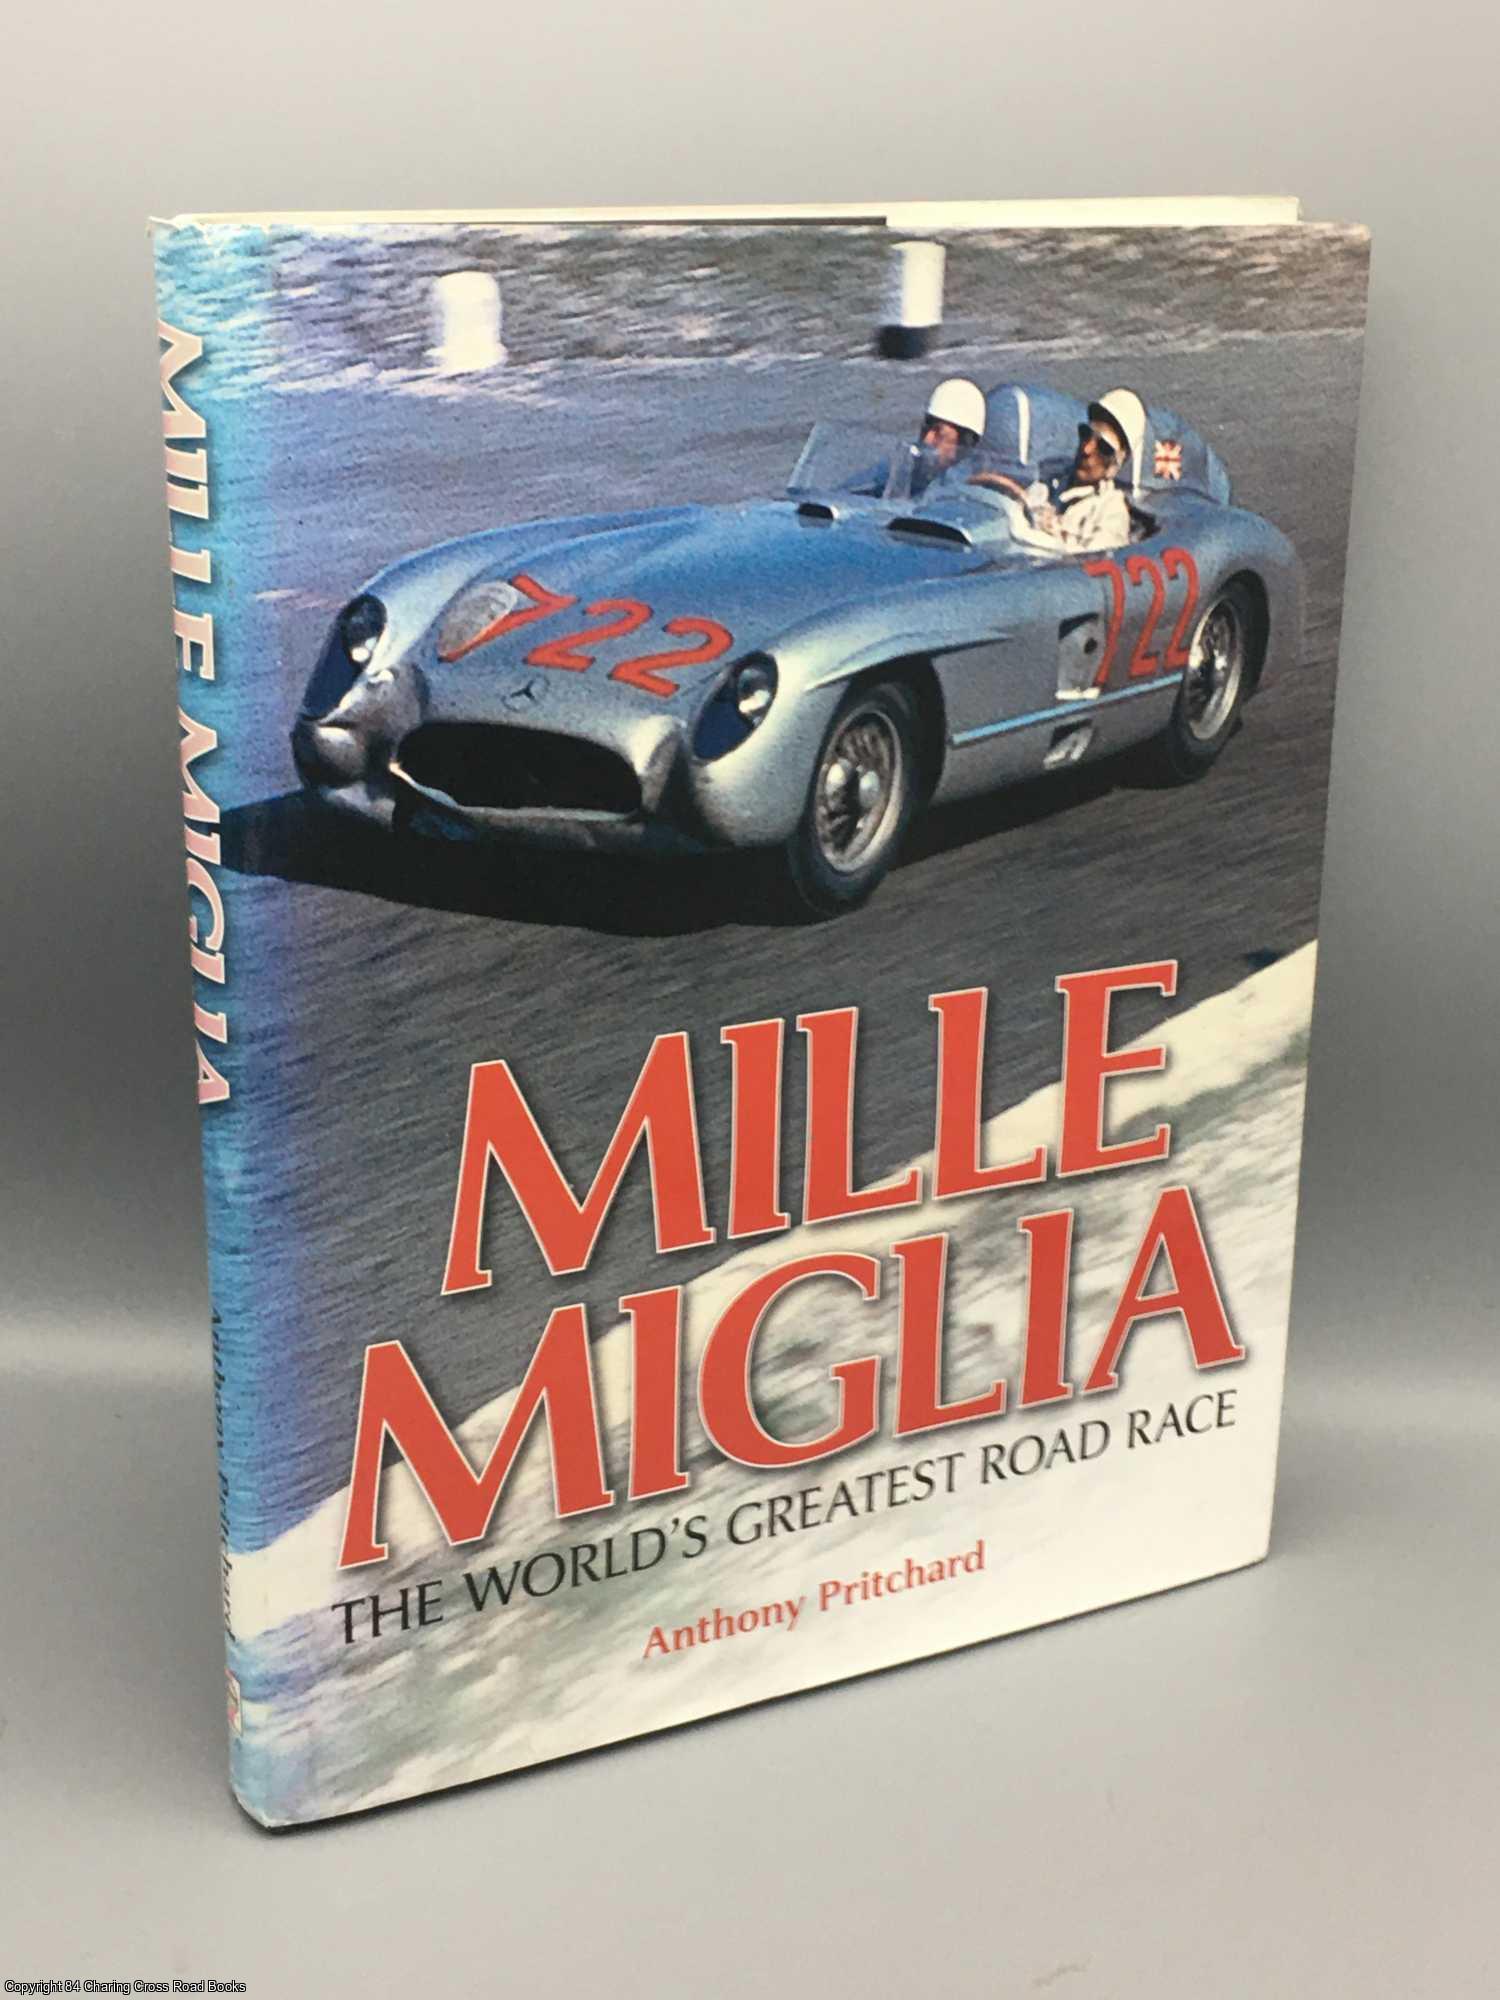 Pritchard, Anthony - Mille Miglia: the world's greatest road race